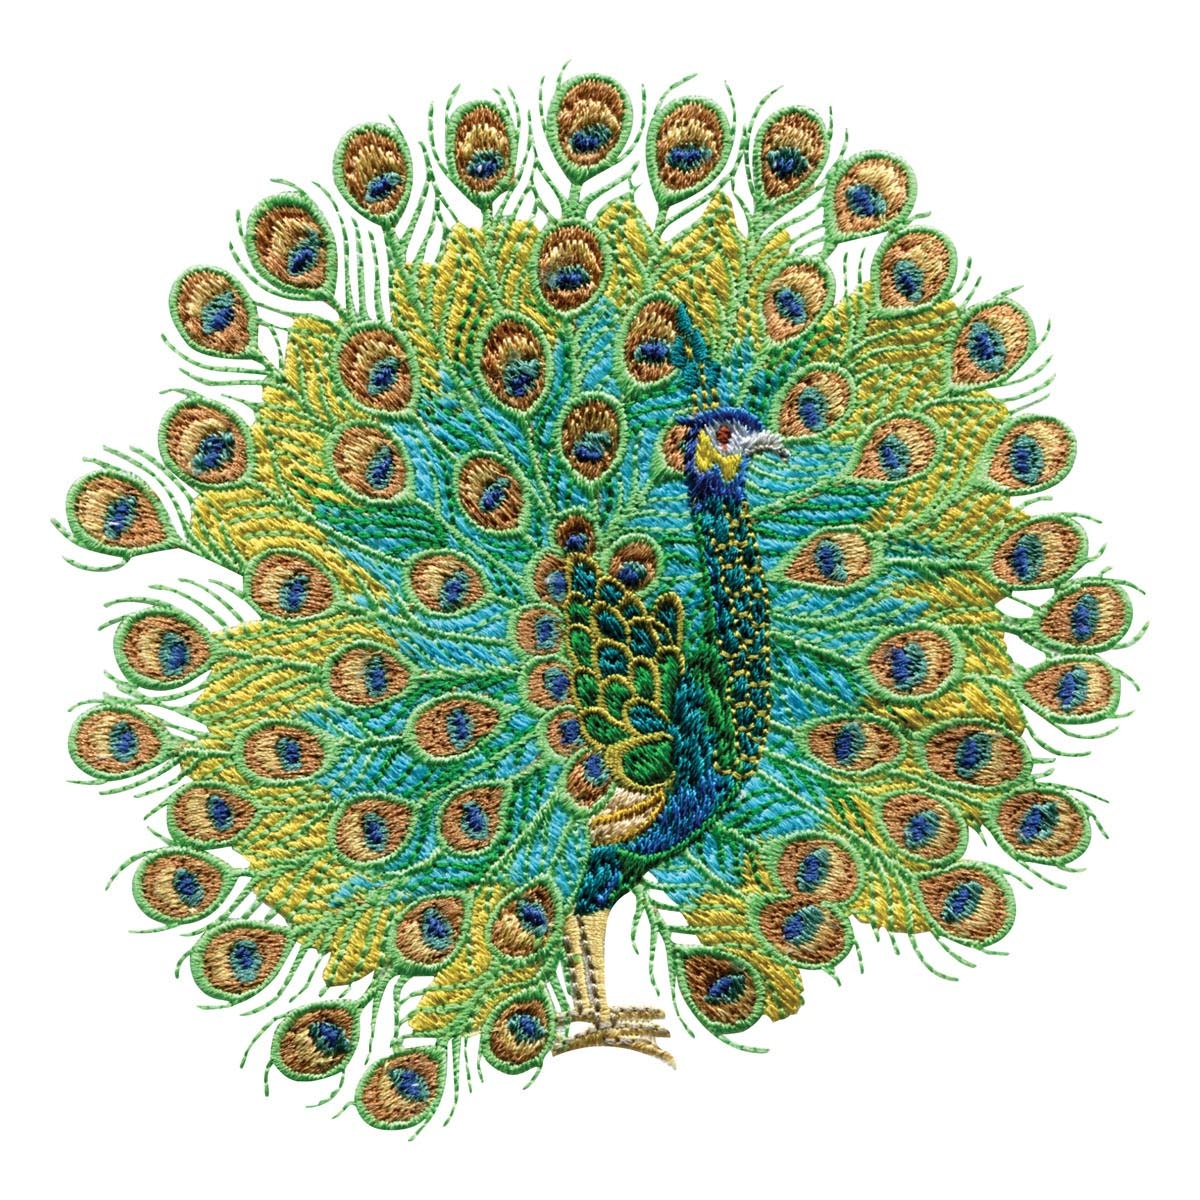 Peacock Embroidery Patterns Peacock Embroidery Design